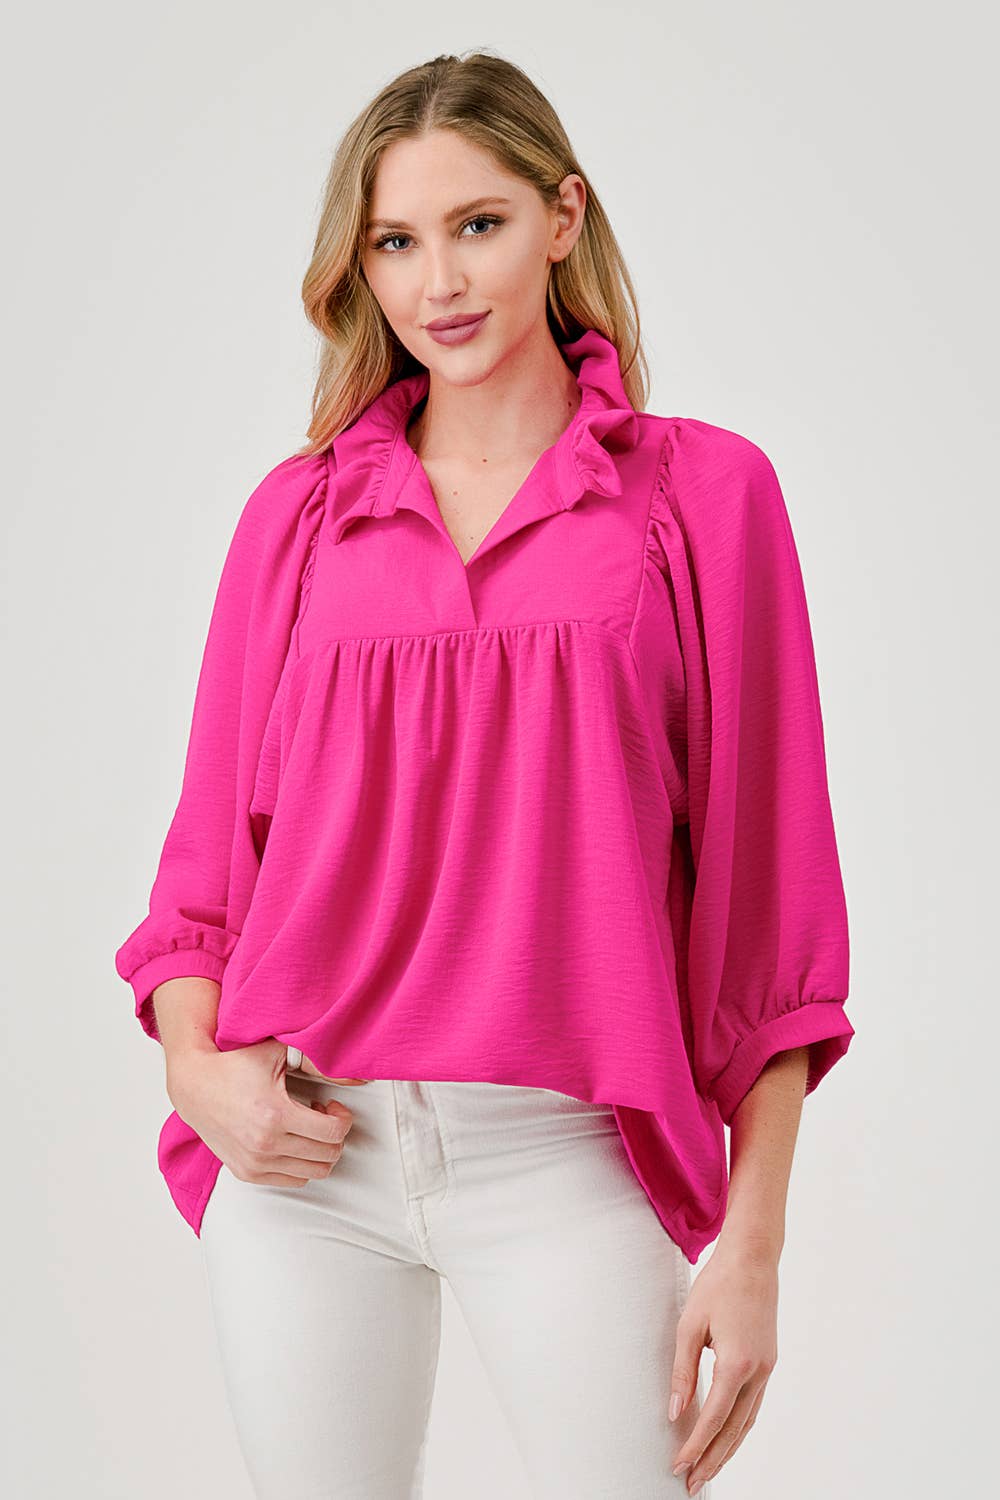 Pink Mandy Elbow Sleeve Cuffed Top with Ruffle Collar